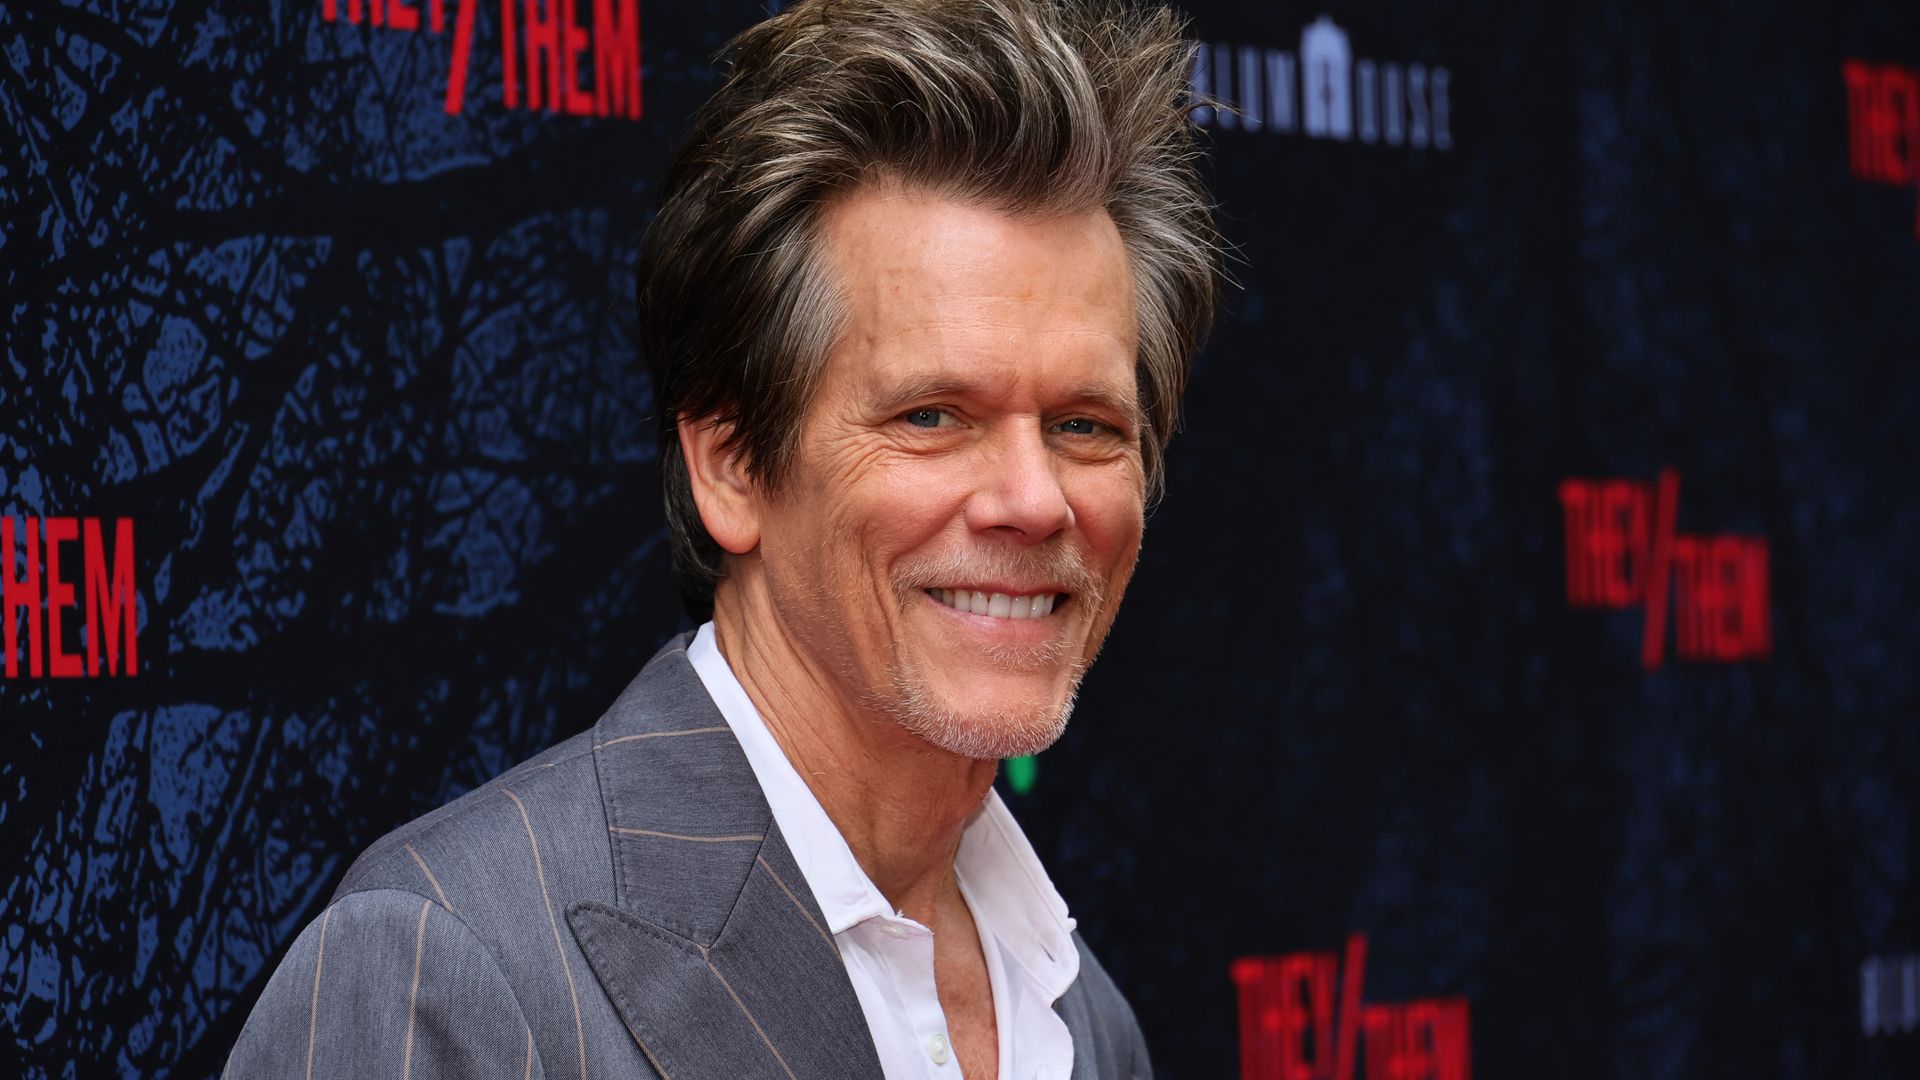 Kevin Bacon's bonding session with lookalike daughter Sosie has fans in tears